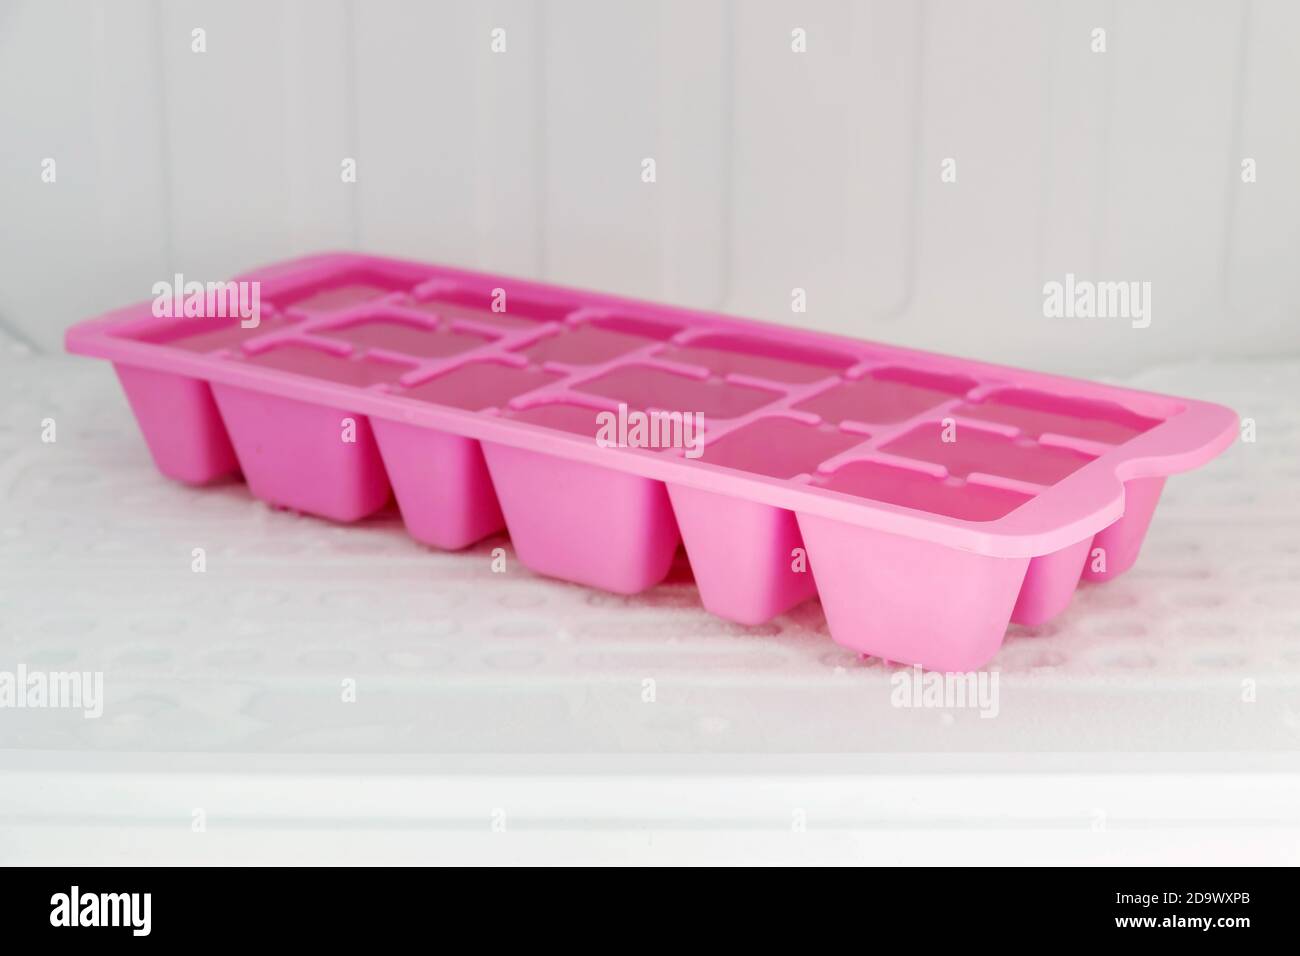 Rubber Ice Cube Tray Distorted Stock Photo 79575052